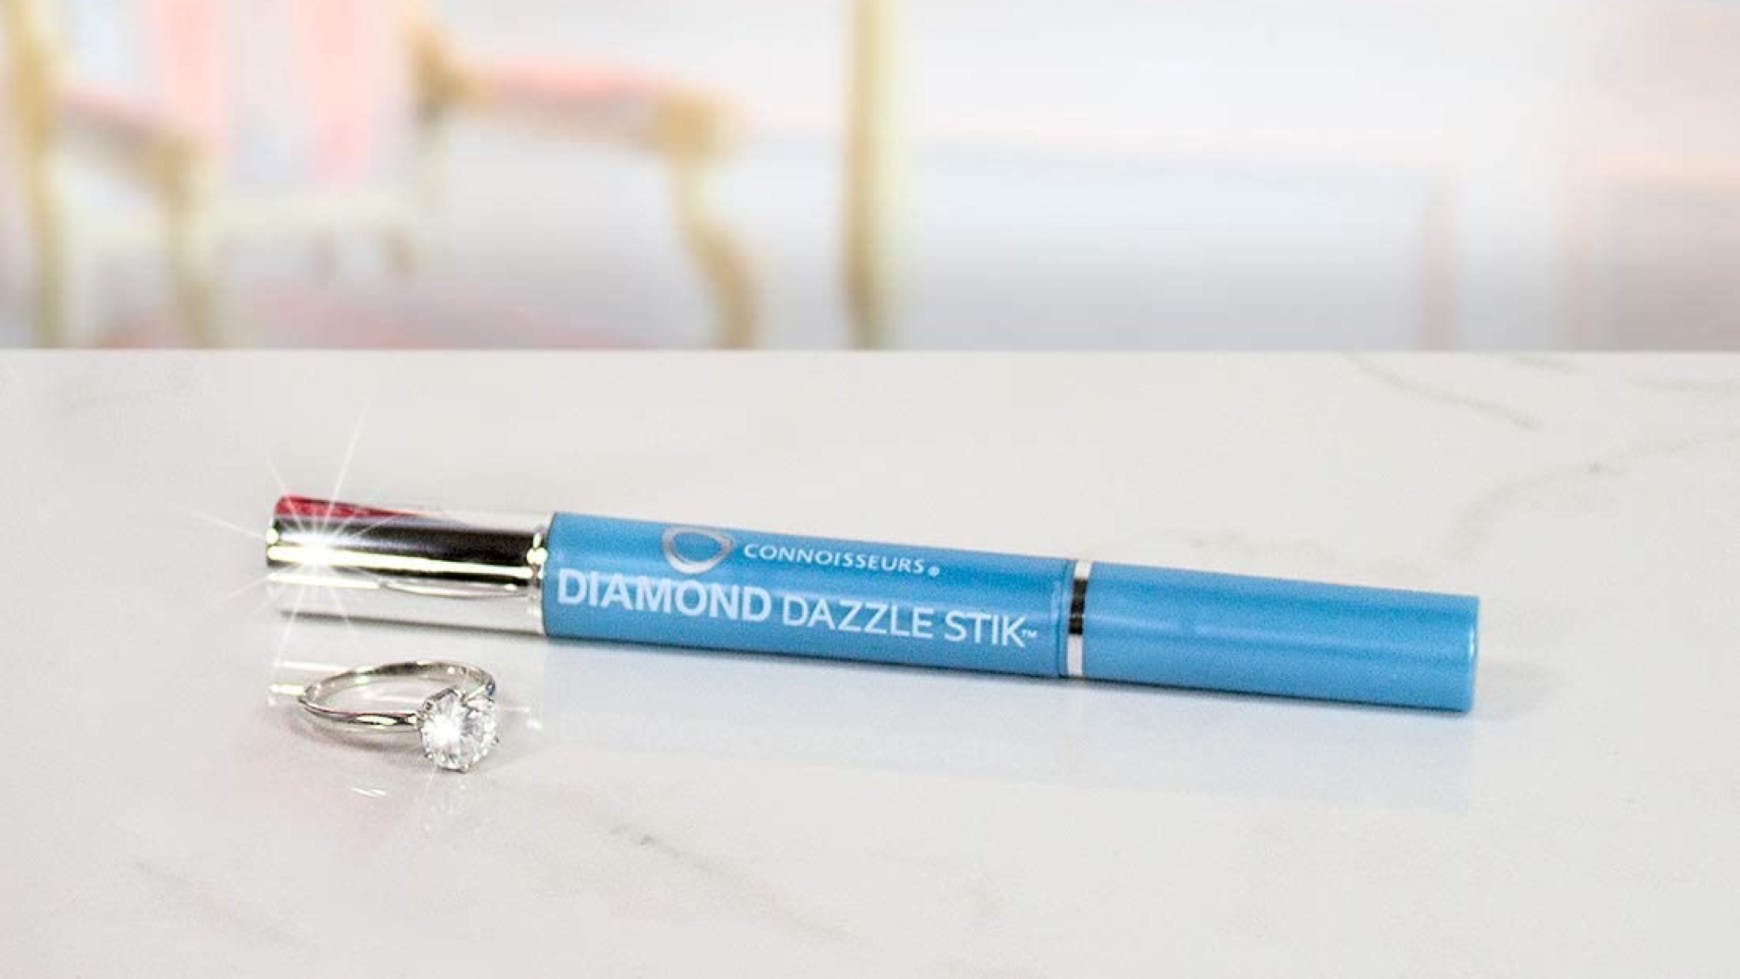 brush that can clean diamonds and other jewelry pieces